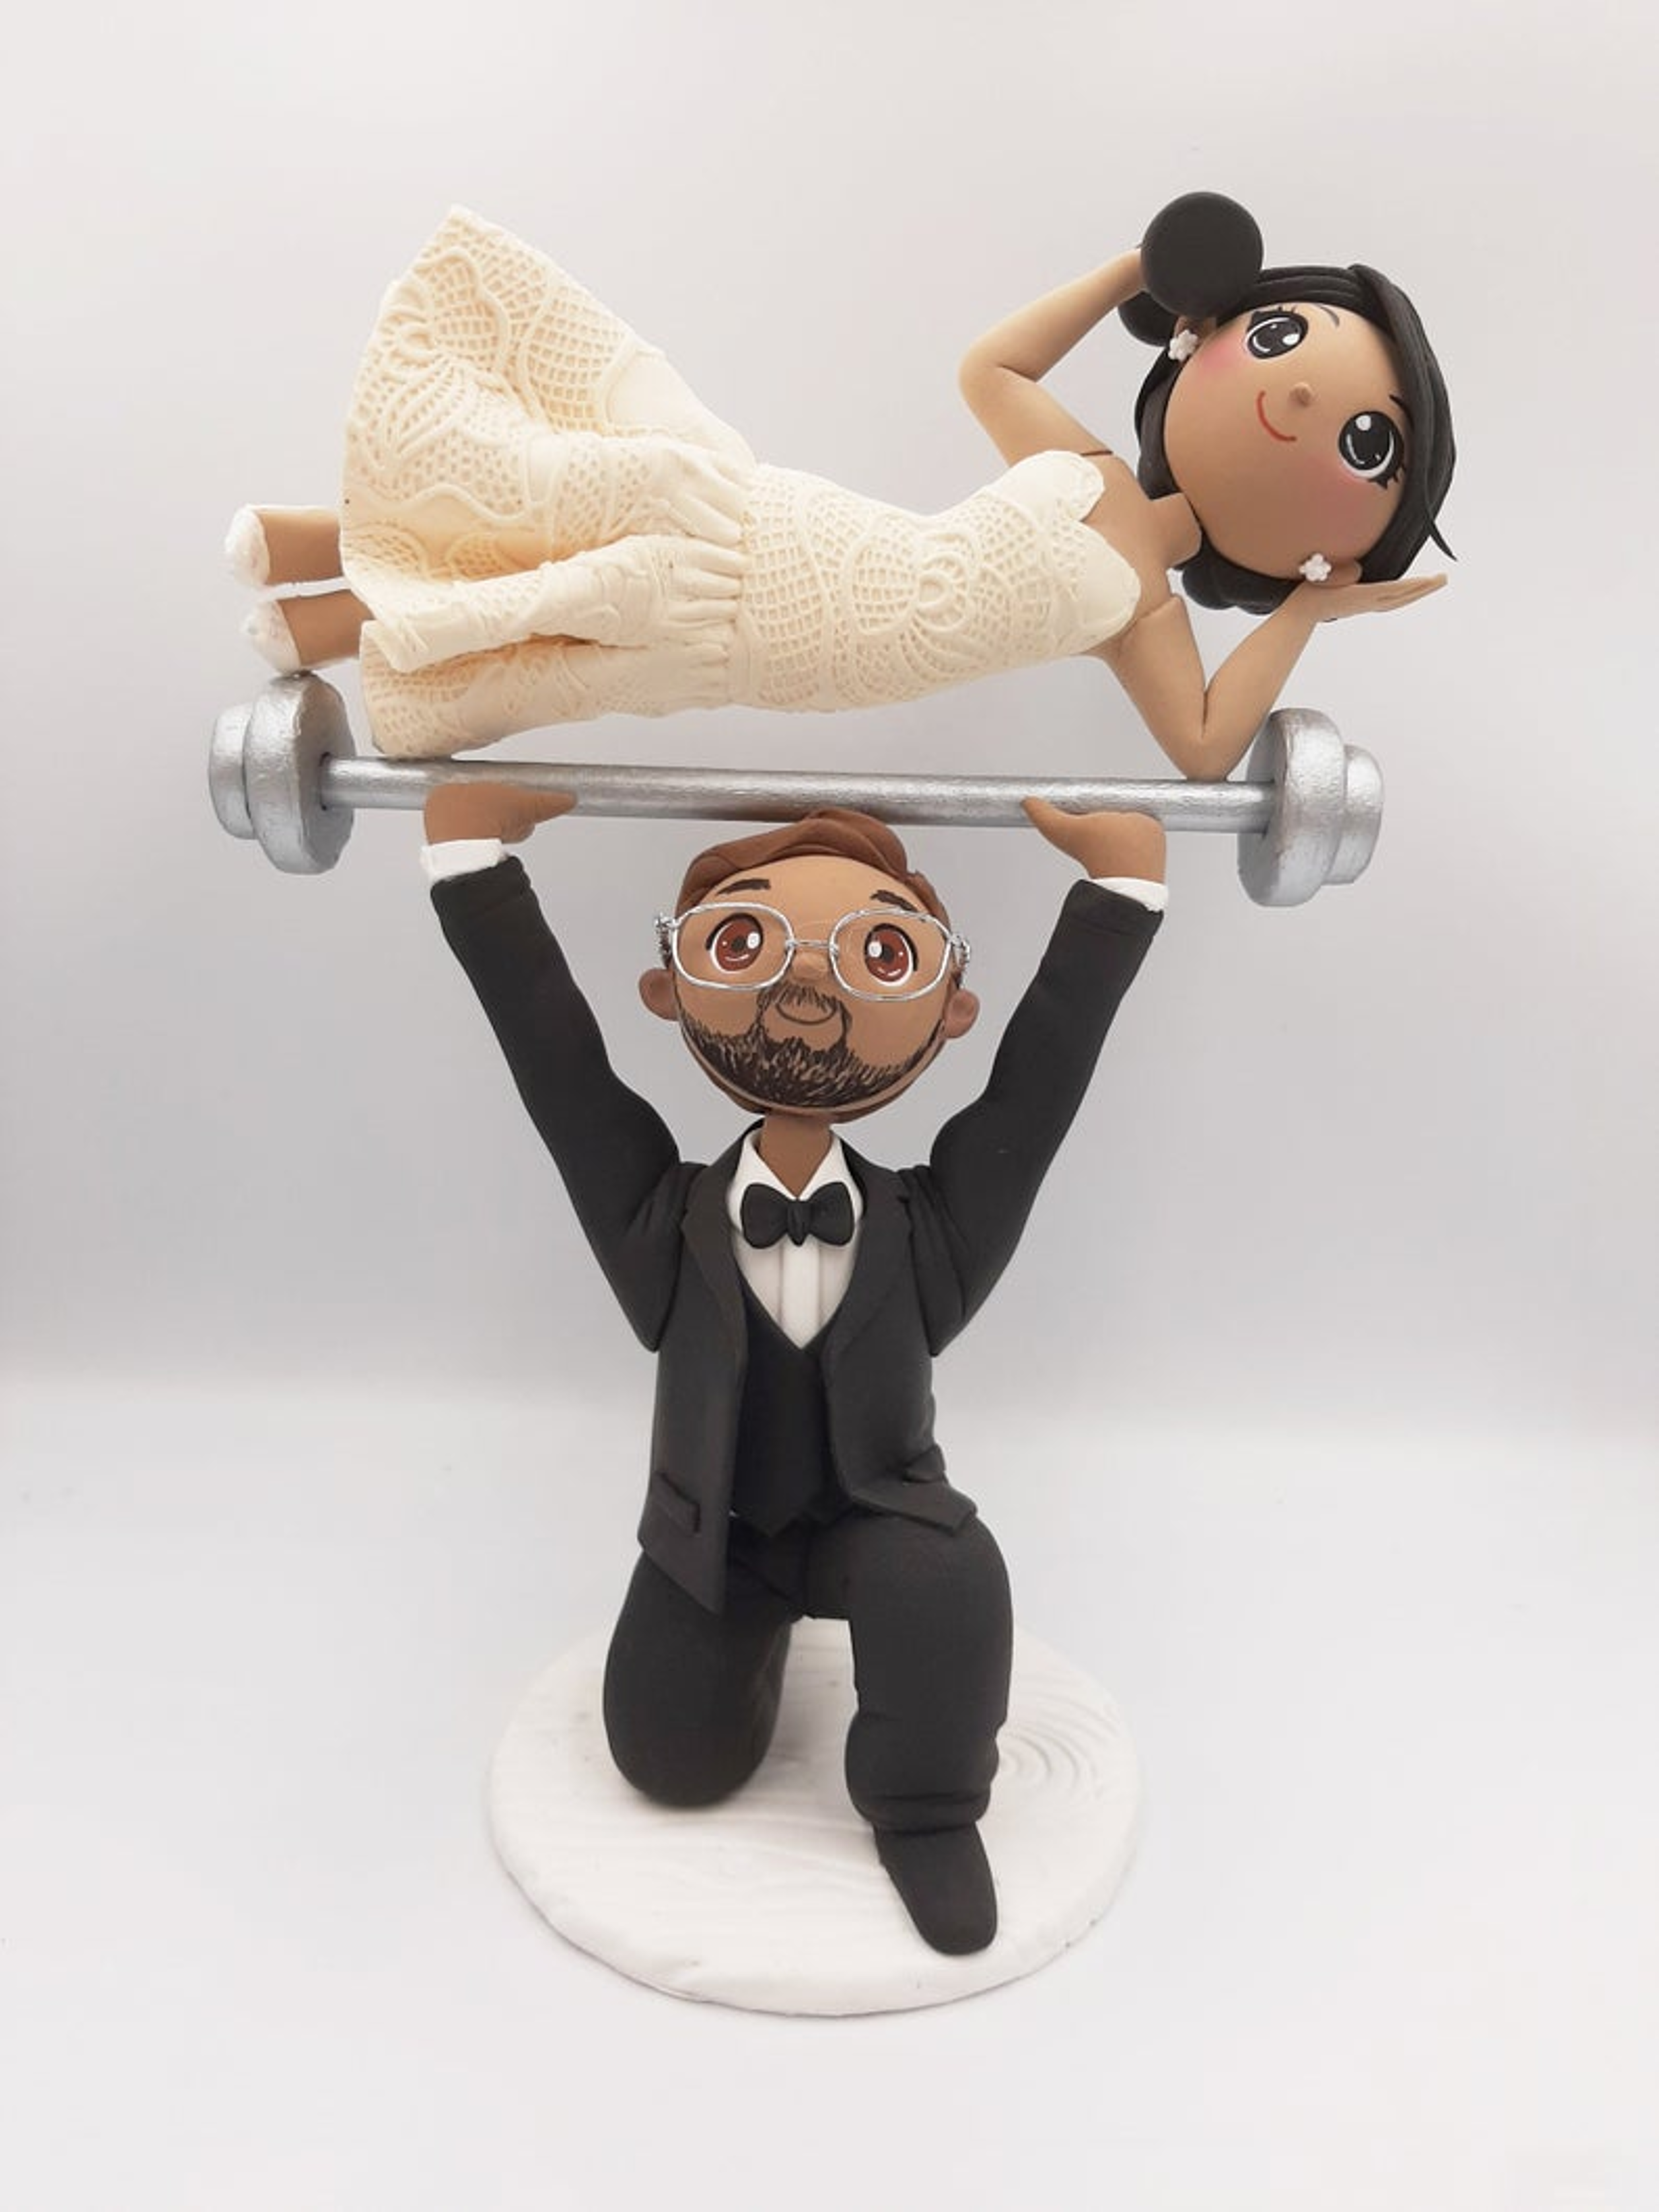 Picture of Weight lifting wedding cake topper, Fitness bride and groom cake topper, Crossfit wedding topper